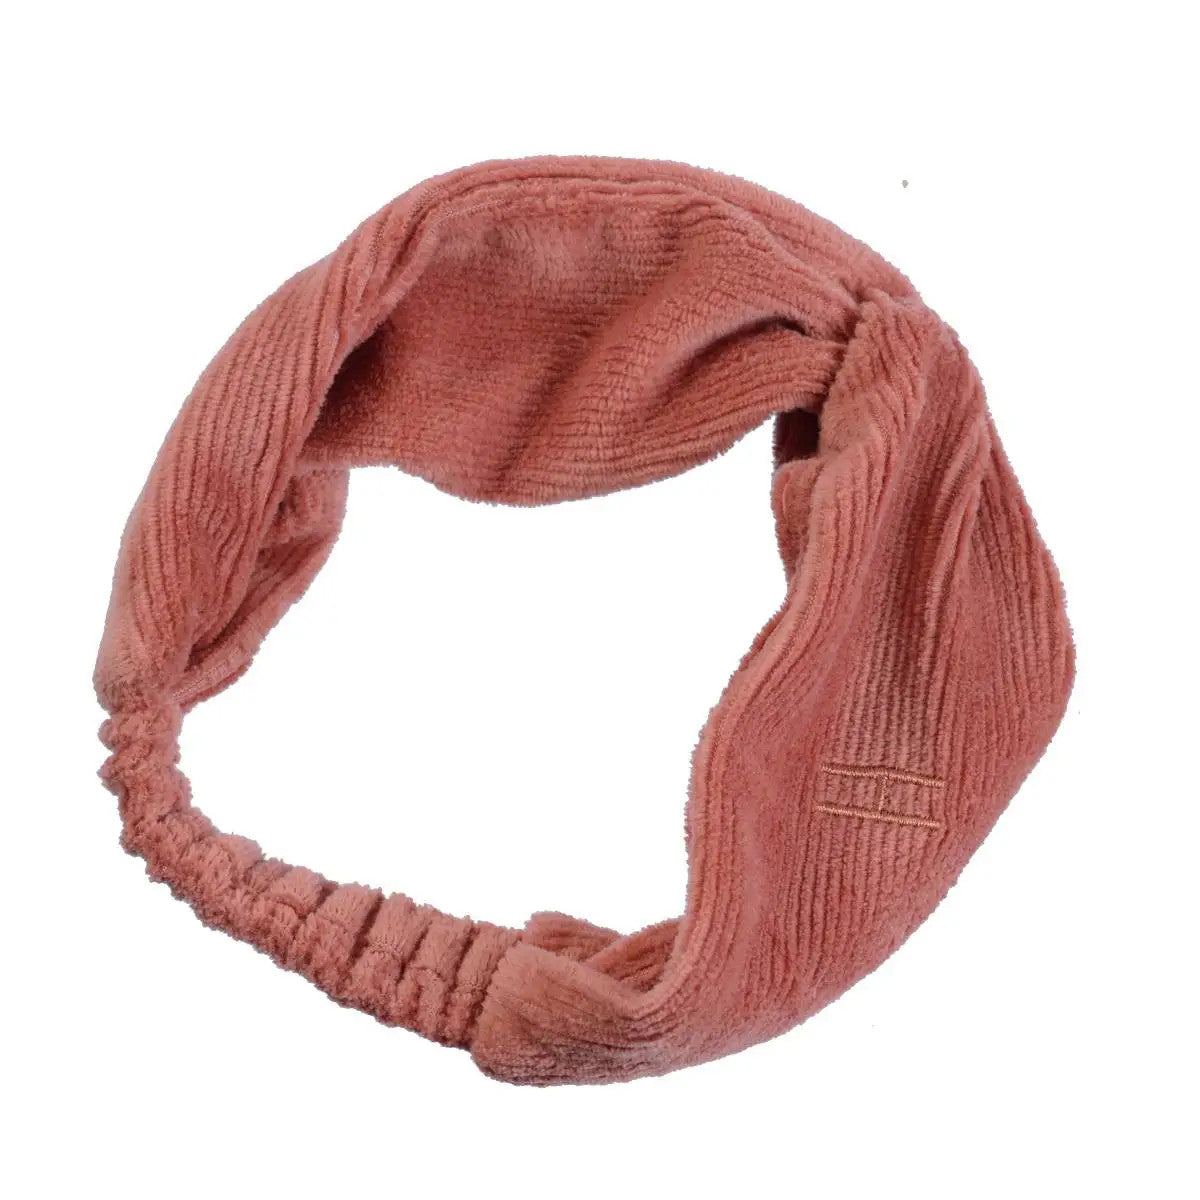 Little Hedonist one-size-fits-all head band, made of organic cotton, in ribbed Old Rose